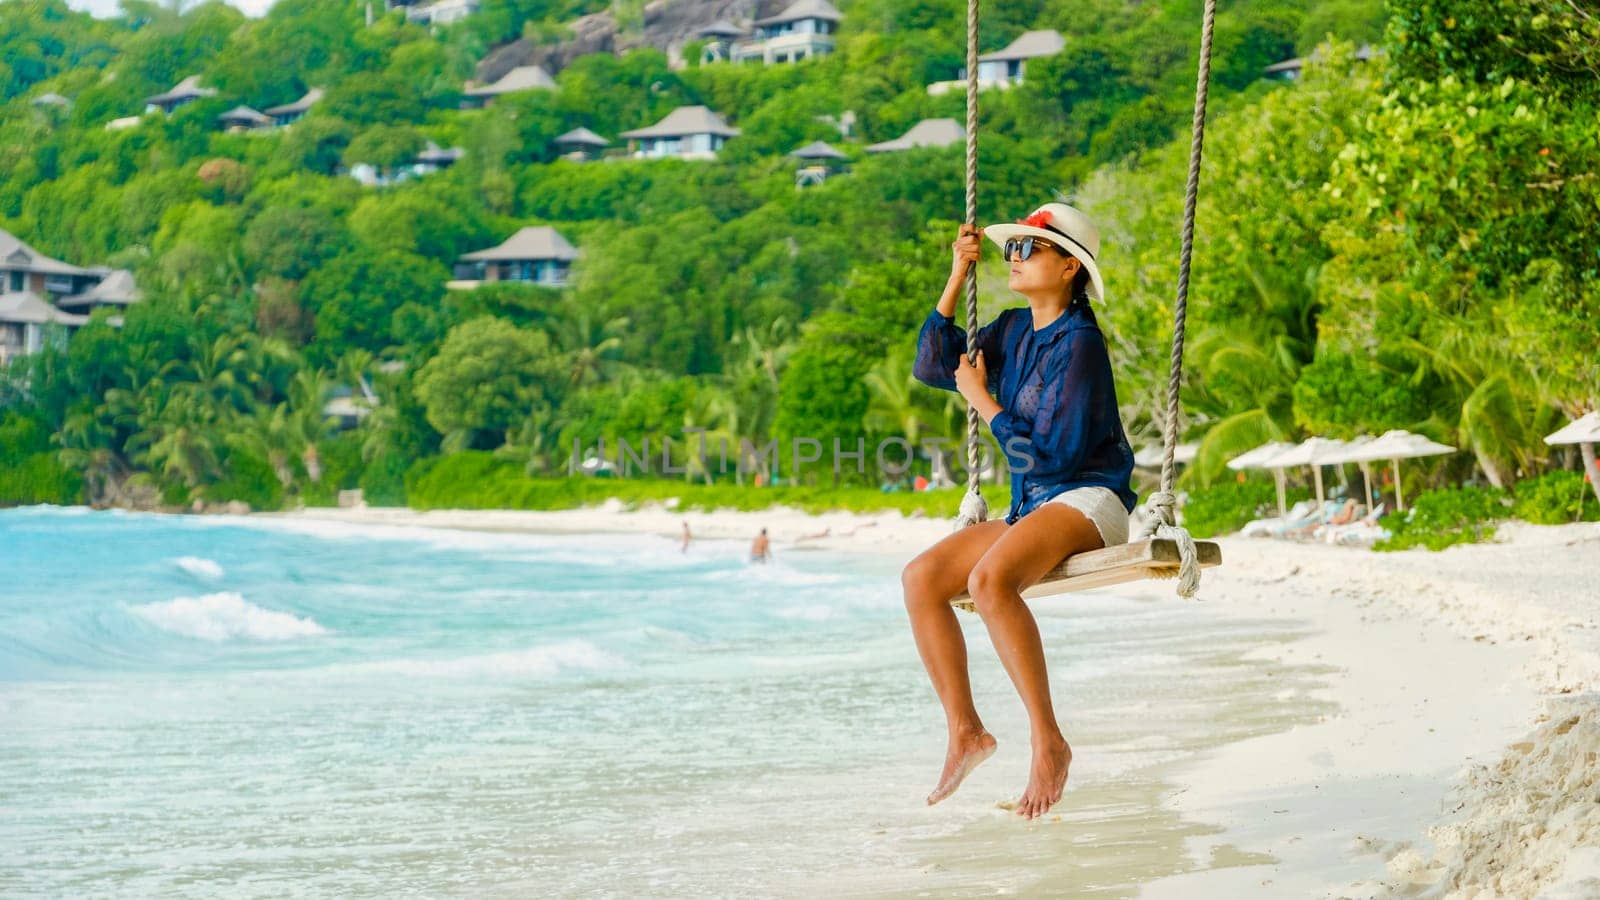 Young women at a swing on a tropical beach in Mahe Tropical Seychelles Islands. woman looking out over the ocean from a swing at the beach in the Seychelles